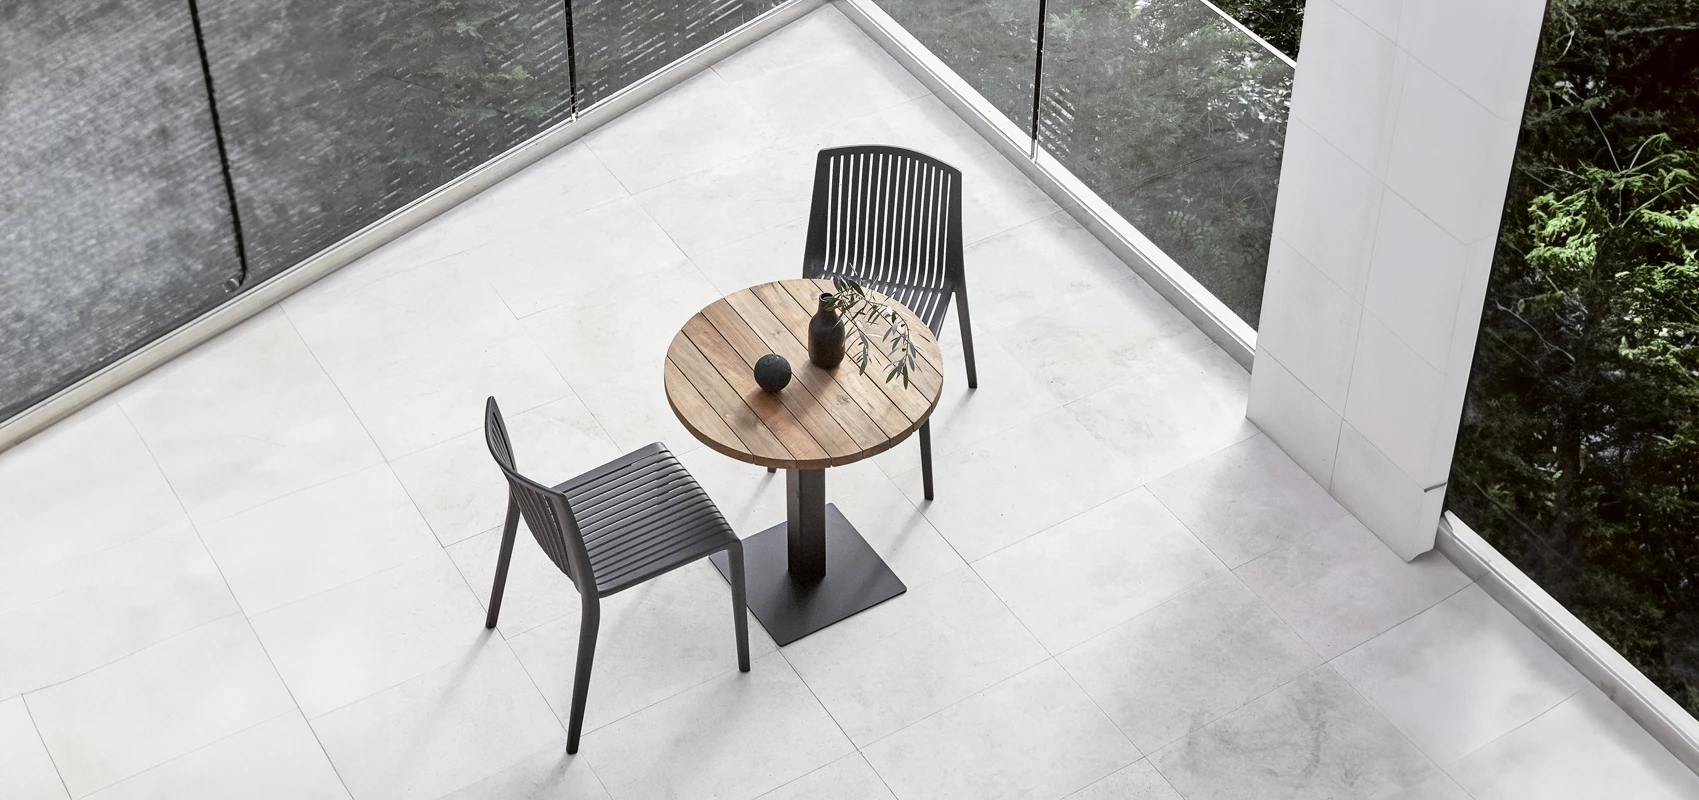 https://www.papatya.com.tr/uploads/images/products/cool/gallery/hd/1688994192_terrace-2person-chair-dark-grey-garden-dinner.webp